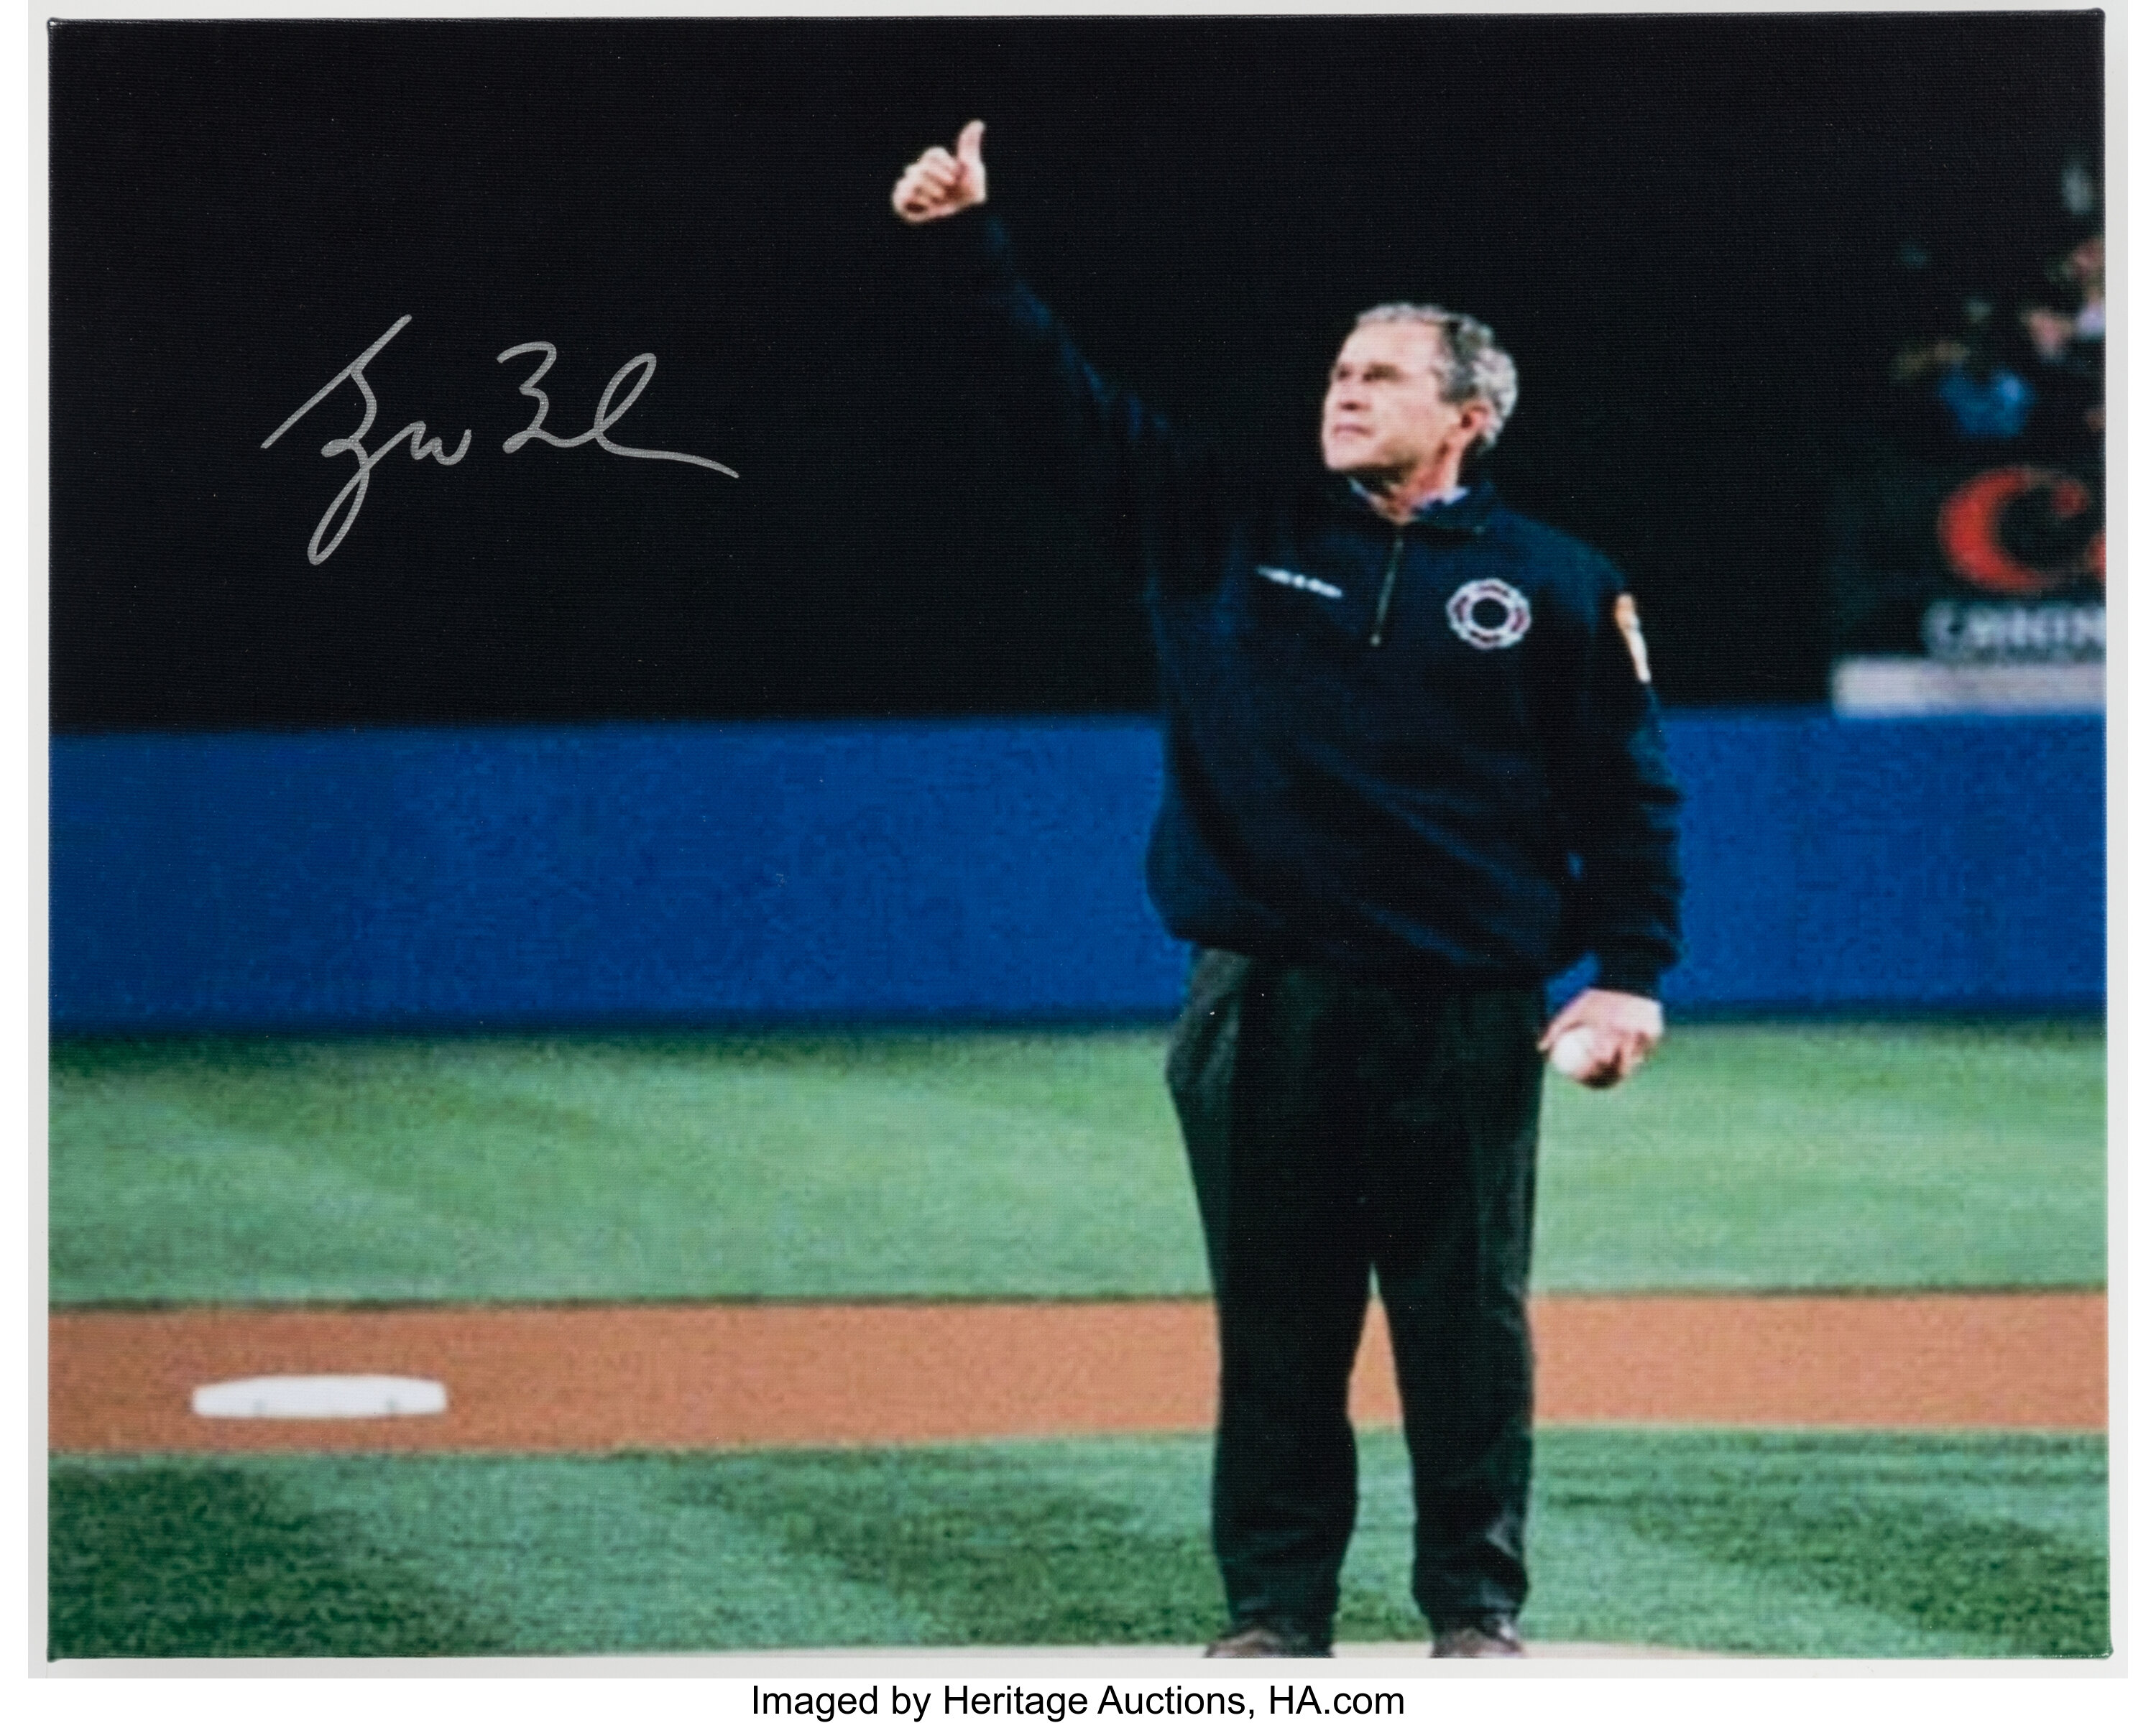 Bush recalls 2001 World Series pitch in note to former Yankees catcher